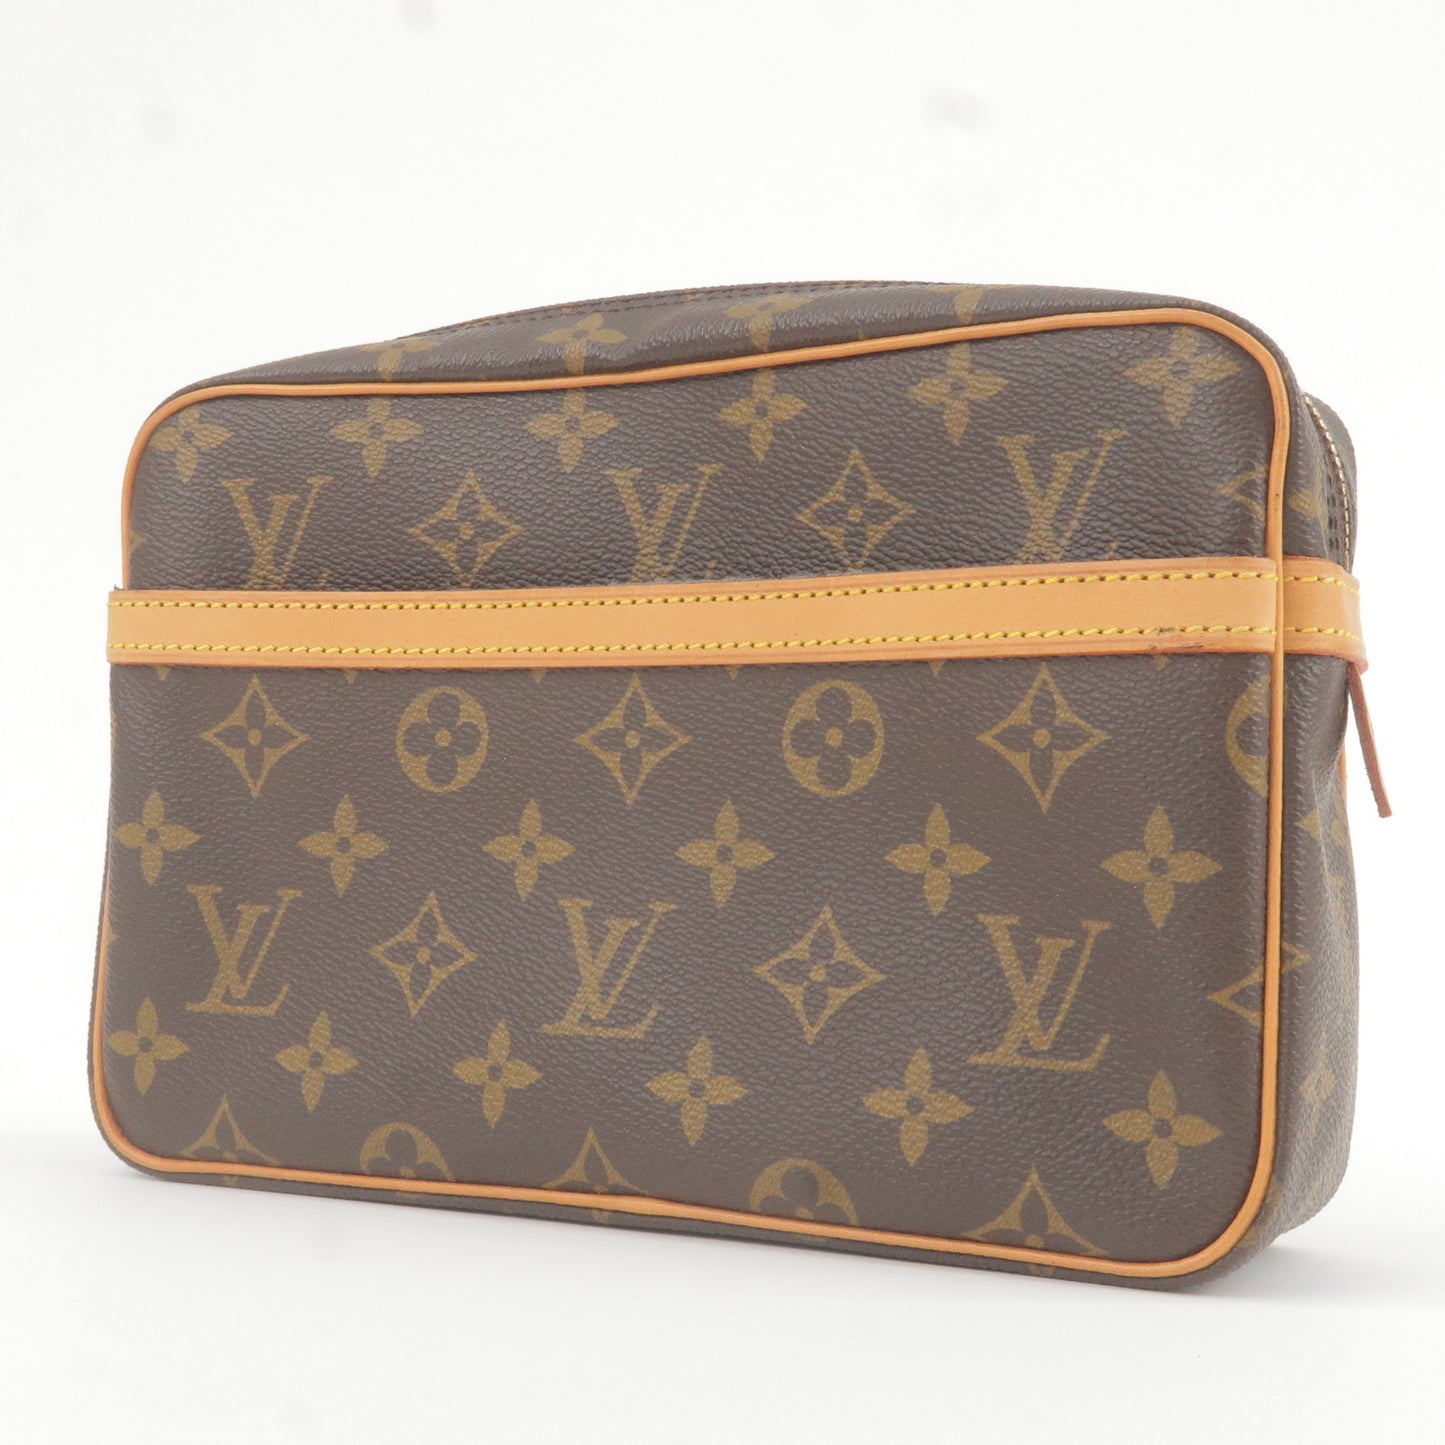 Louis Vuitton 2012 pre-owned limited edition Golden Arrow Speedy bag